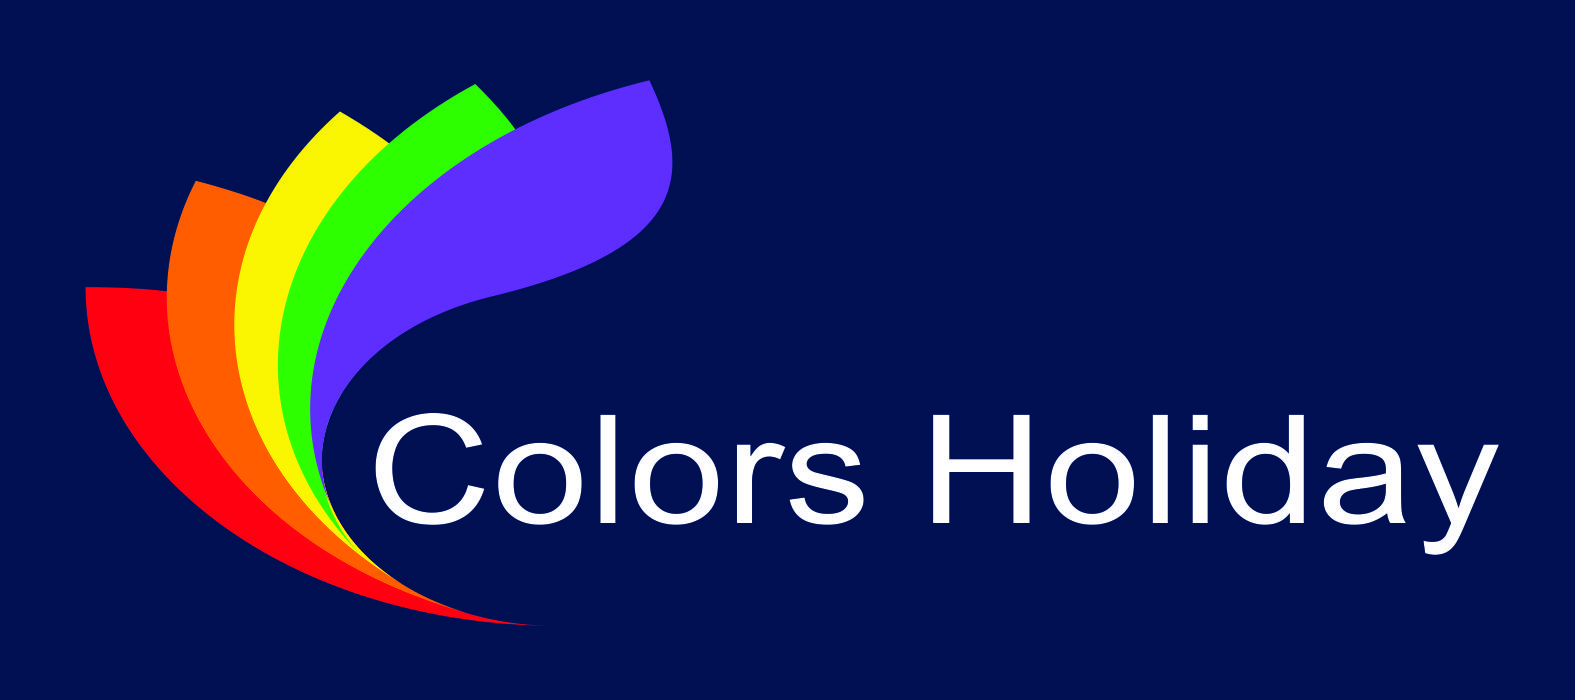 Colors Holiday